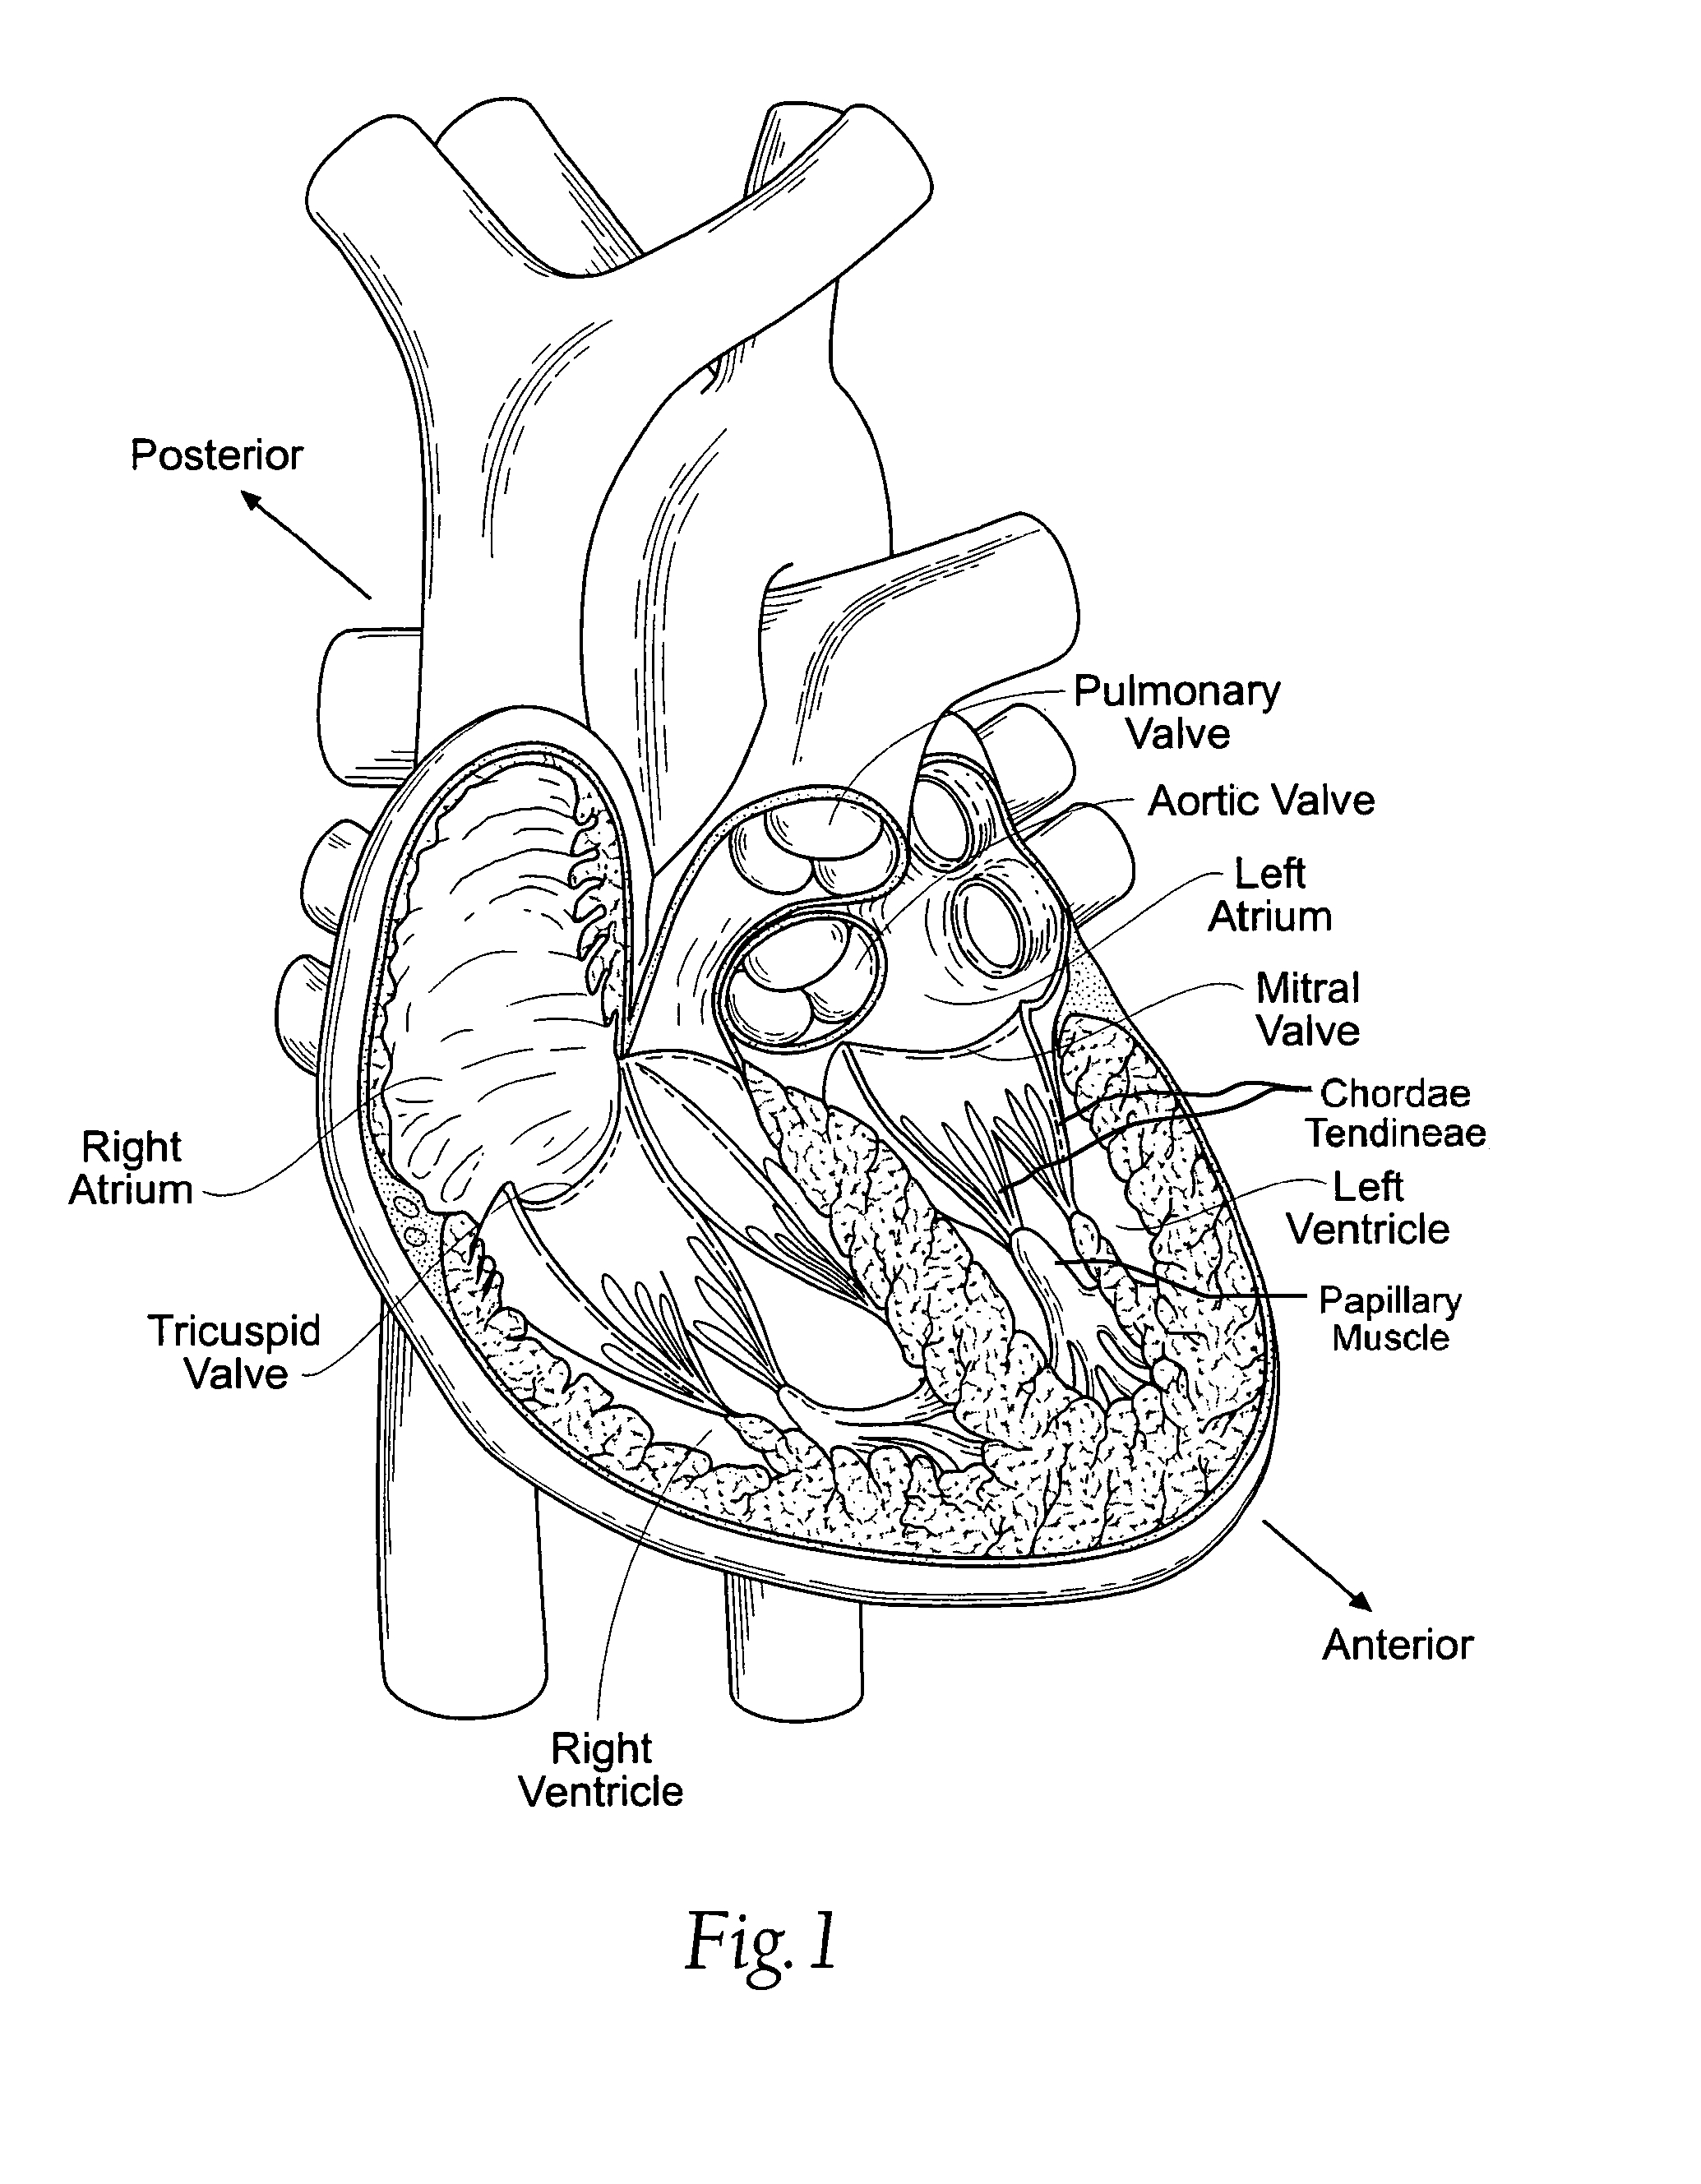 Quick-connect prosthetic heart valve and methods